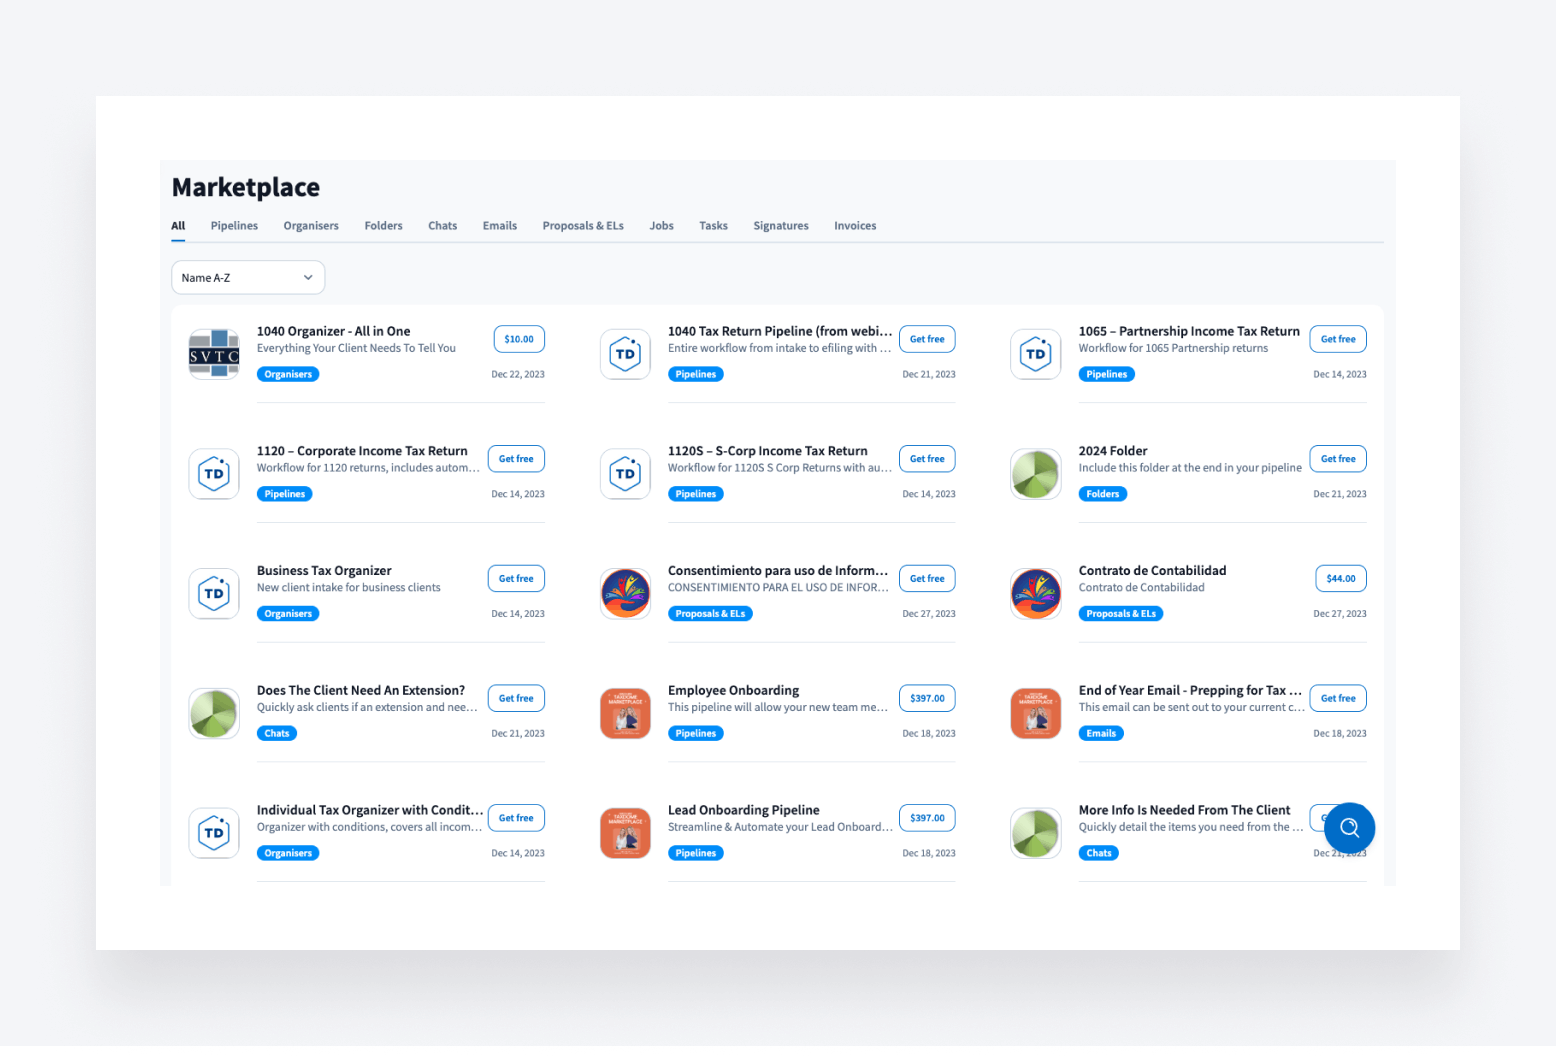 On TaxDome Marketplace, download templates for pipelines, organizers, folders, chats and more.